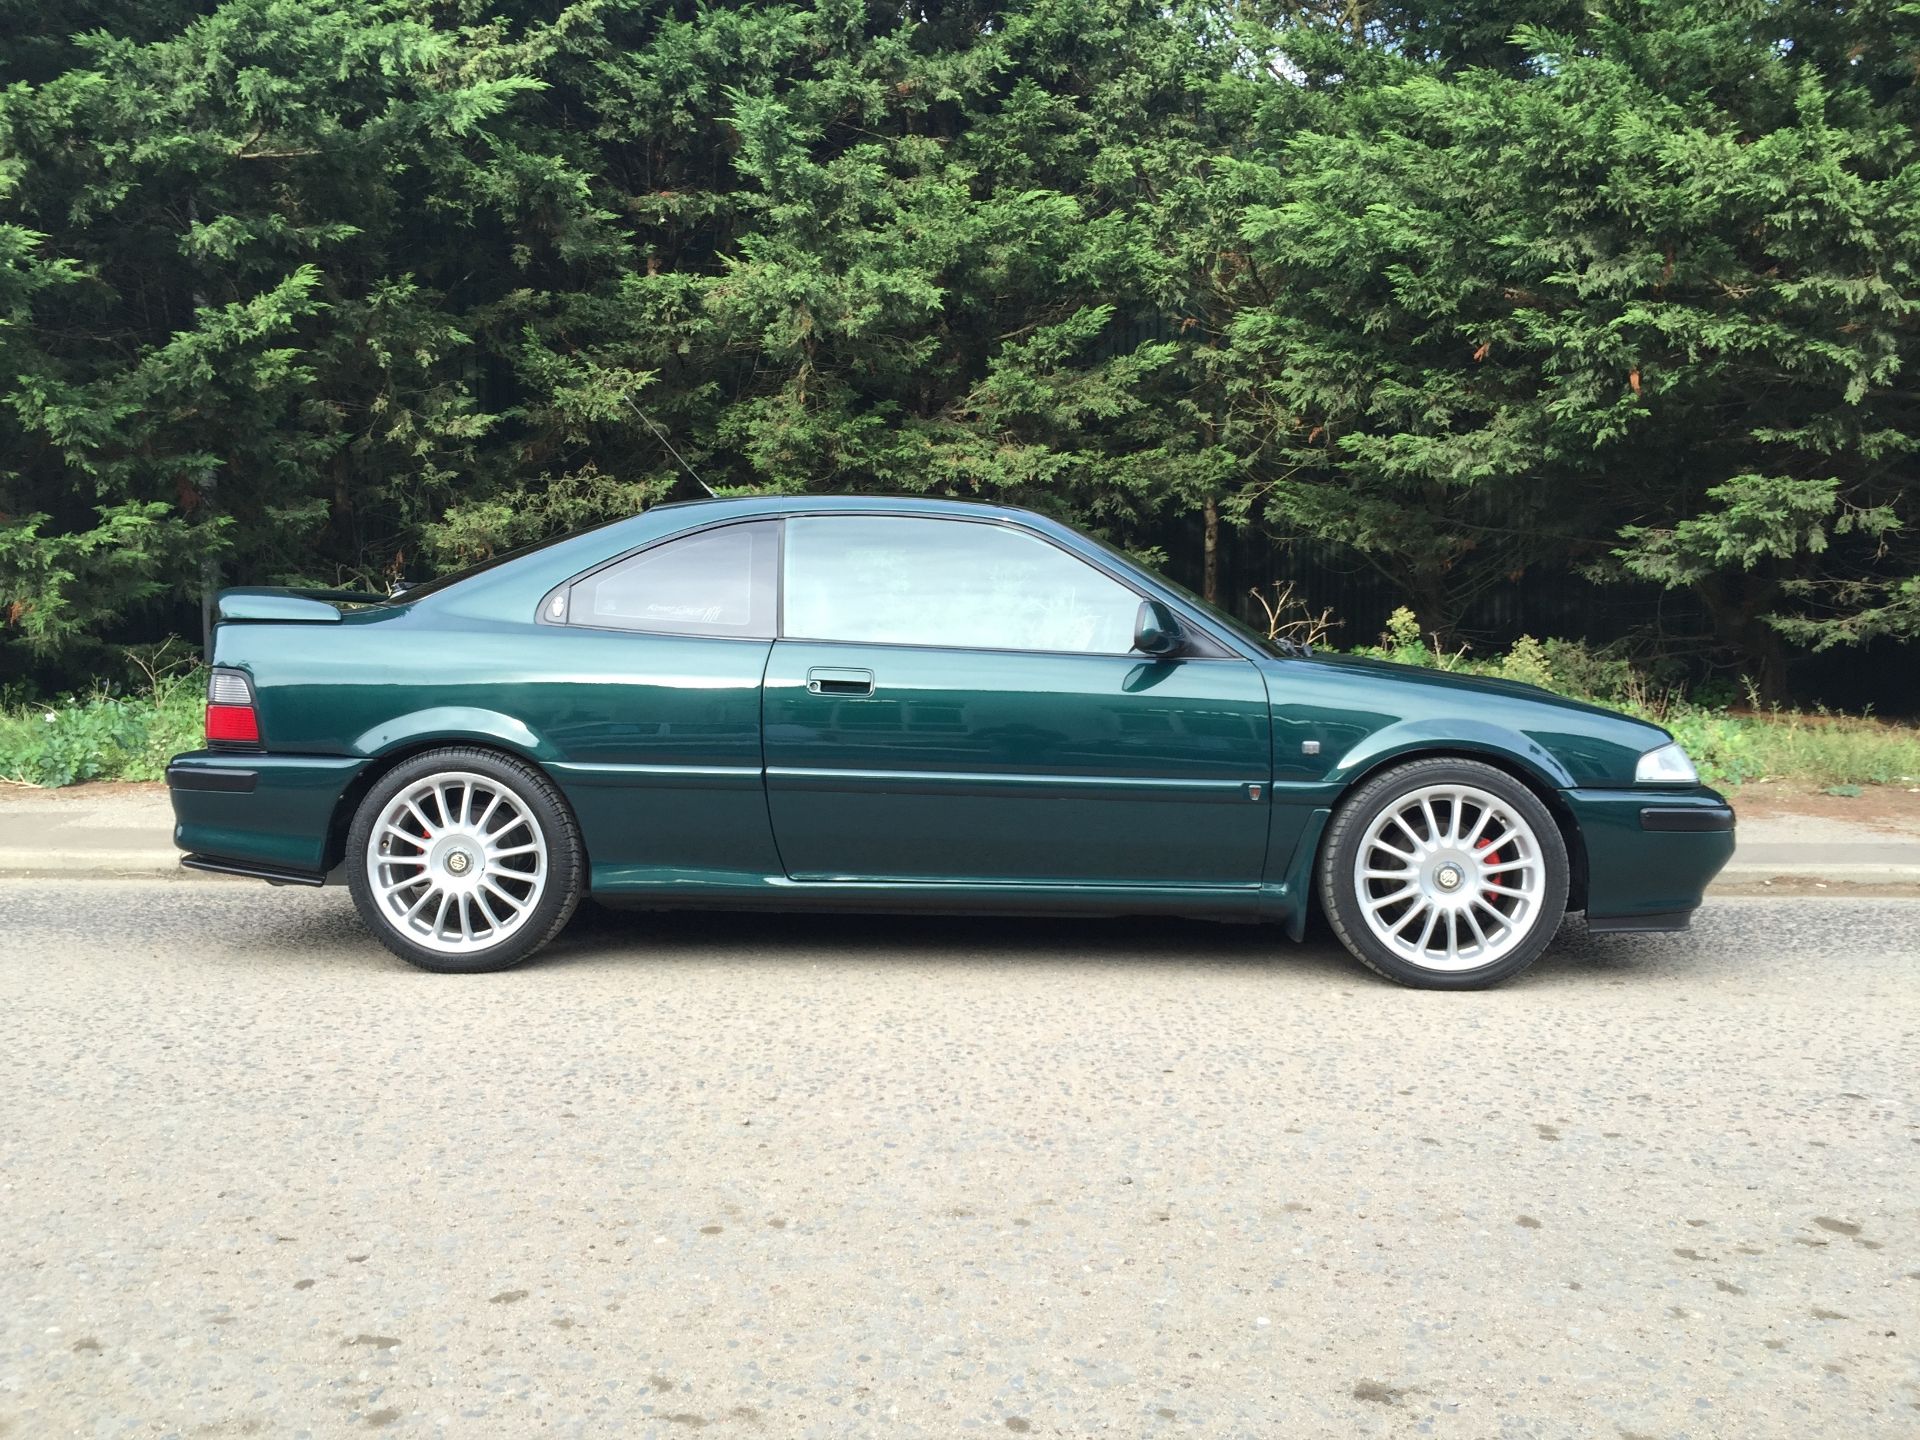 1994 Rover 220 COUPE - Image 8 of 20